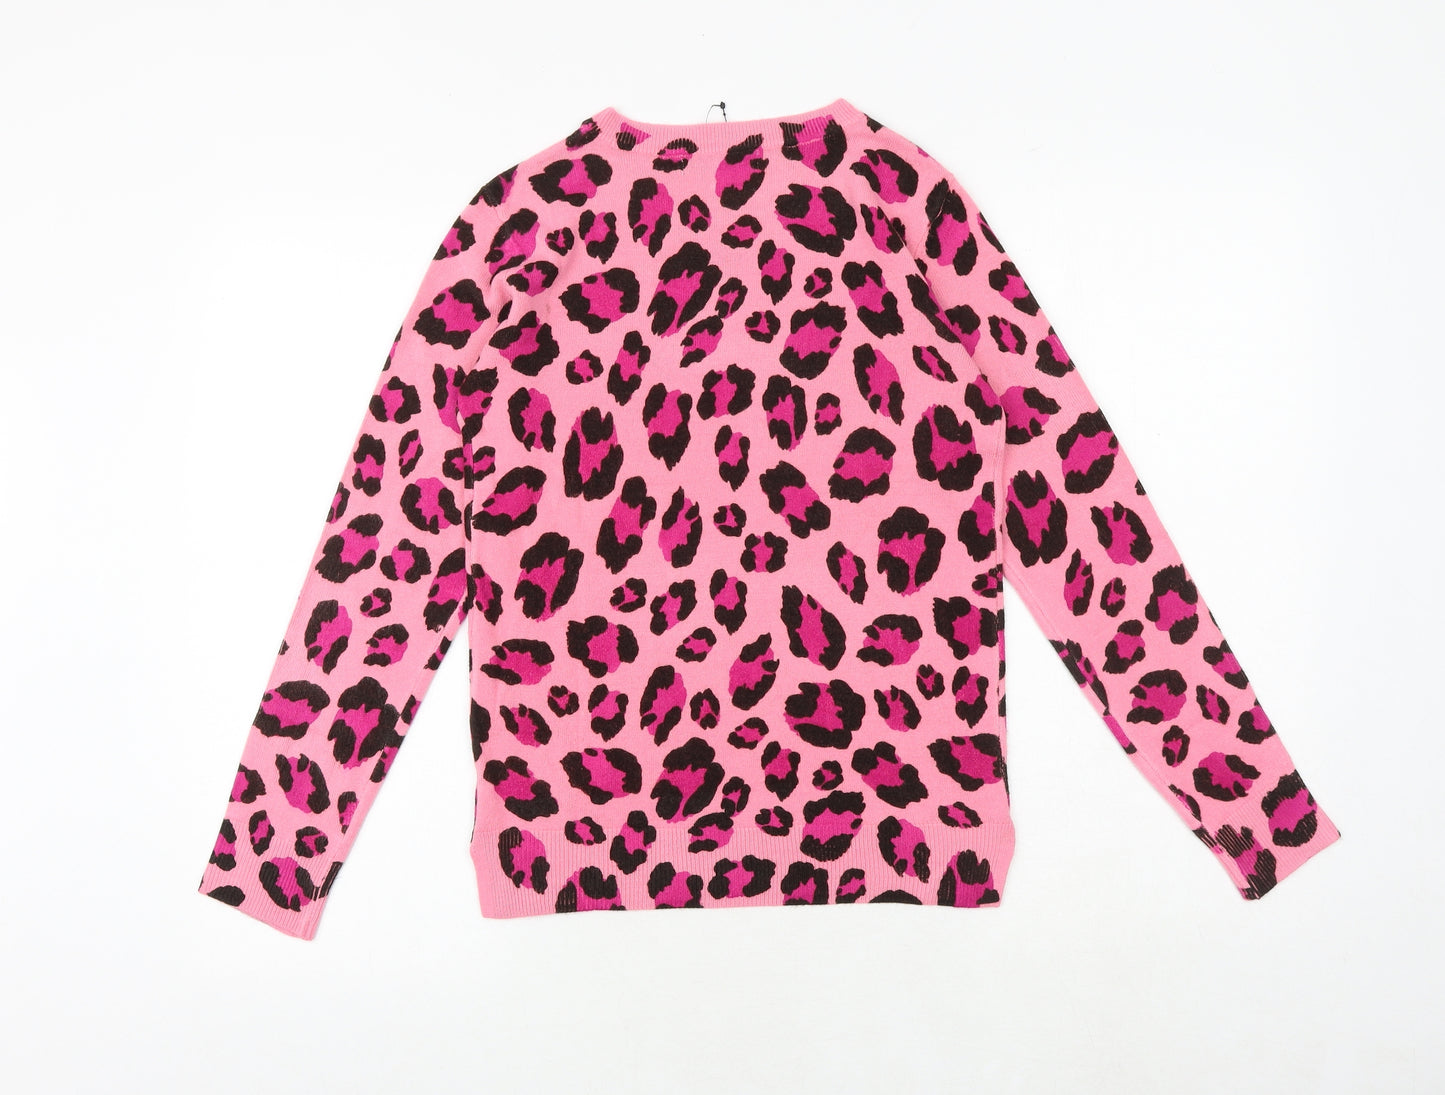 Marks and Spencer Womens Pink Round Neck Animal Print Acrylic Pullover Jumper Size 6 - Leopard Pattern